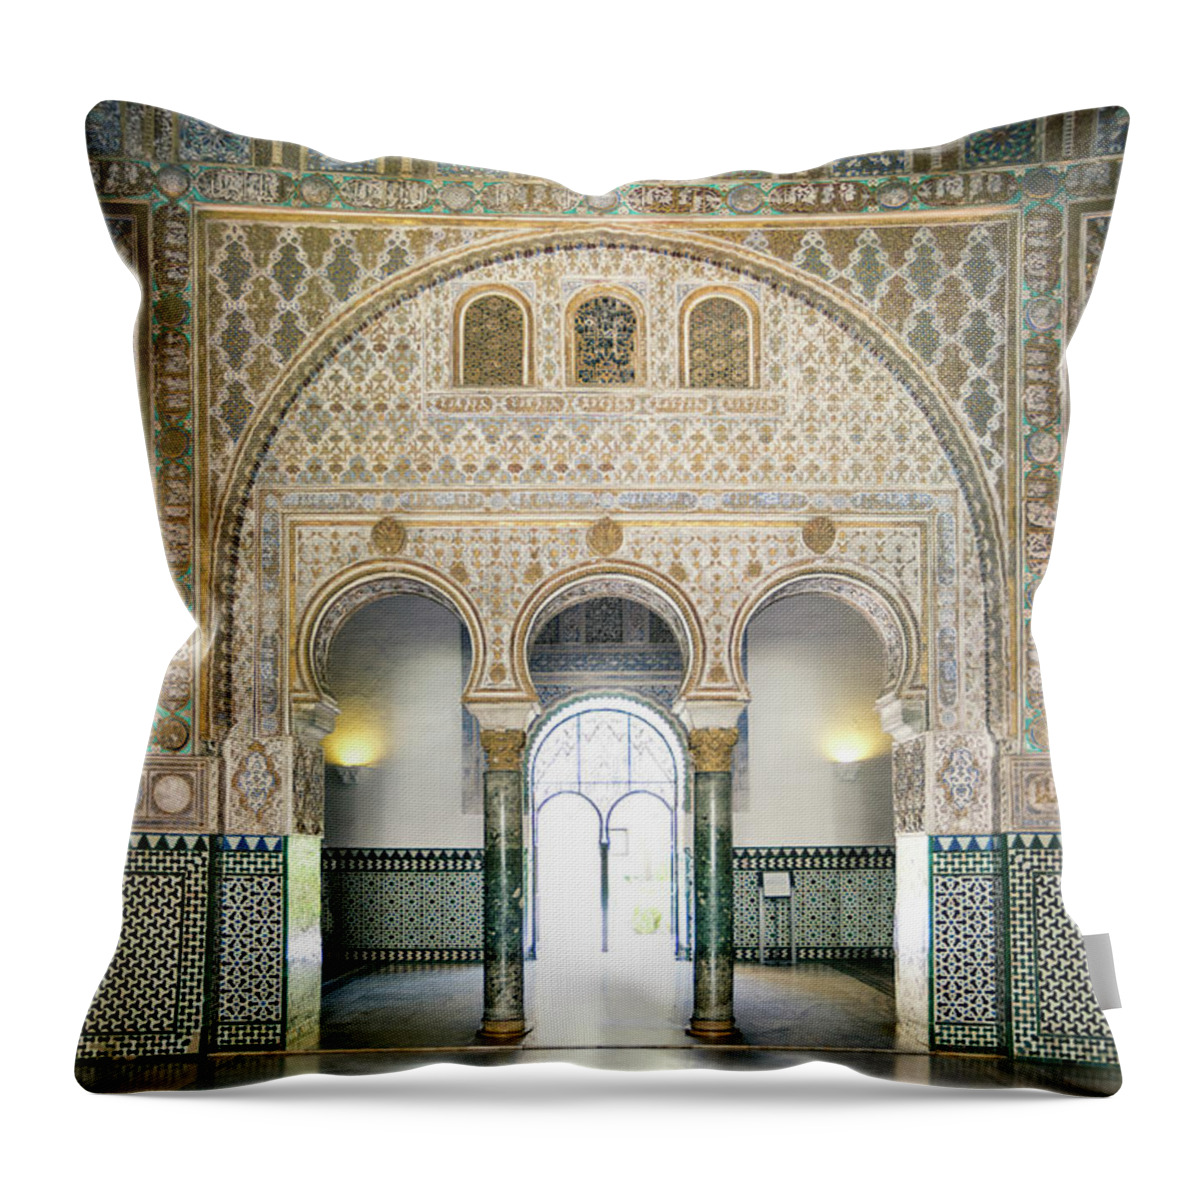 Arch Throw Pillow featuring the photograph Ornate Door Inside The Alcazar Palace by Matteo Colombo